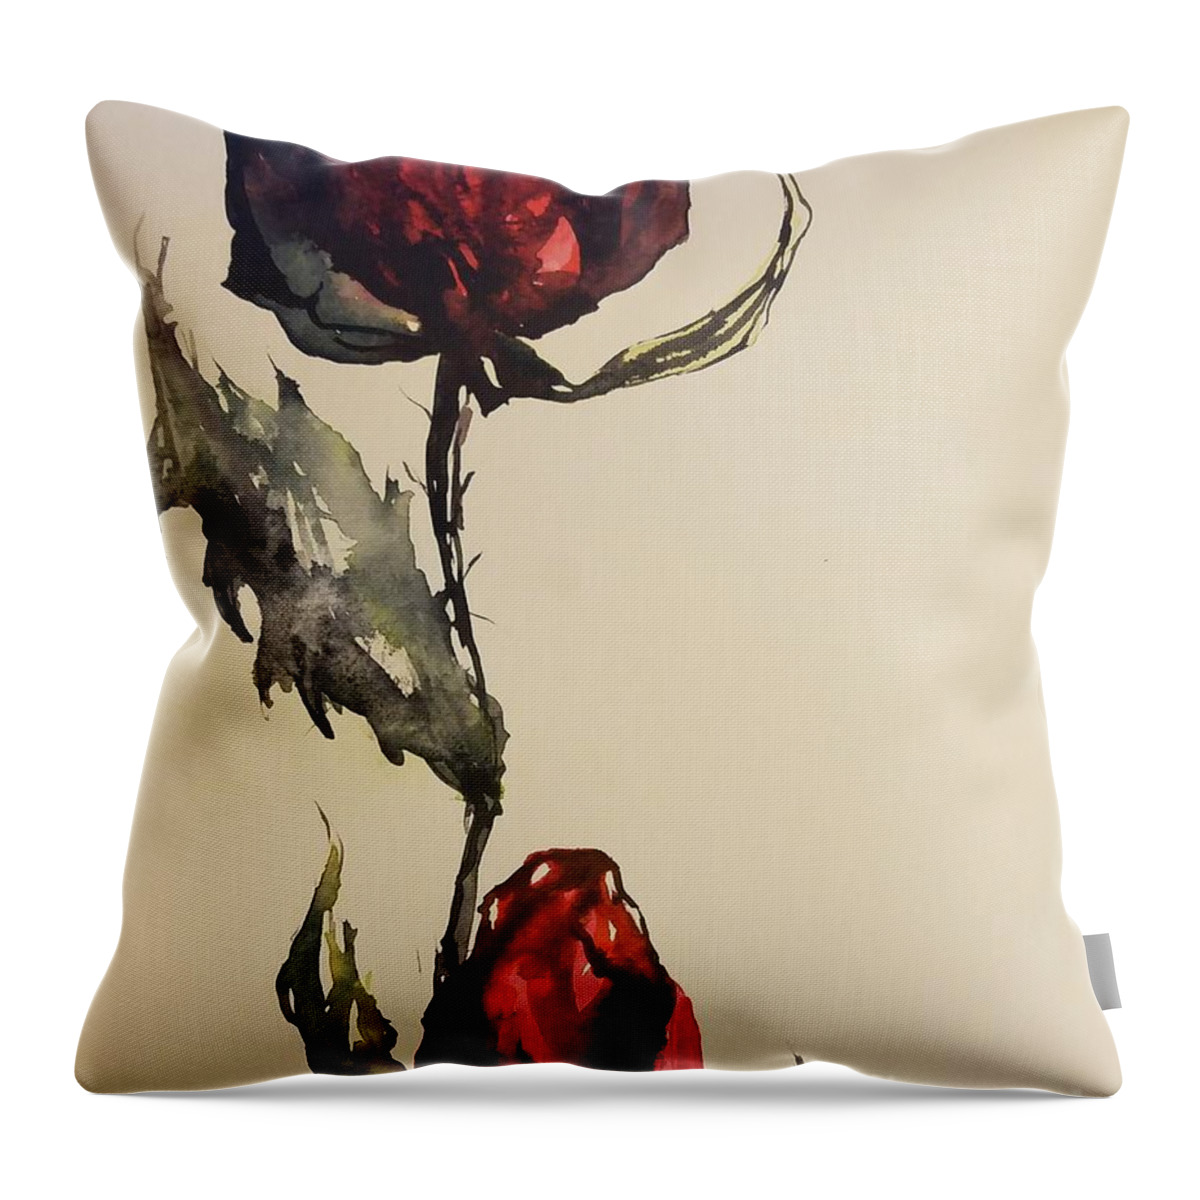 #55 2019 Throw Pillow featuring the painting #55 2019 by Han in Huang wong